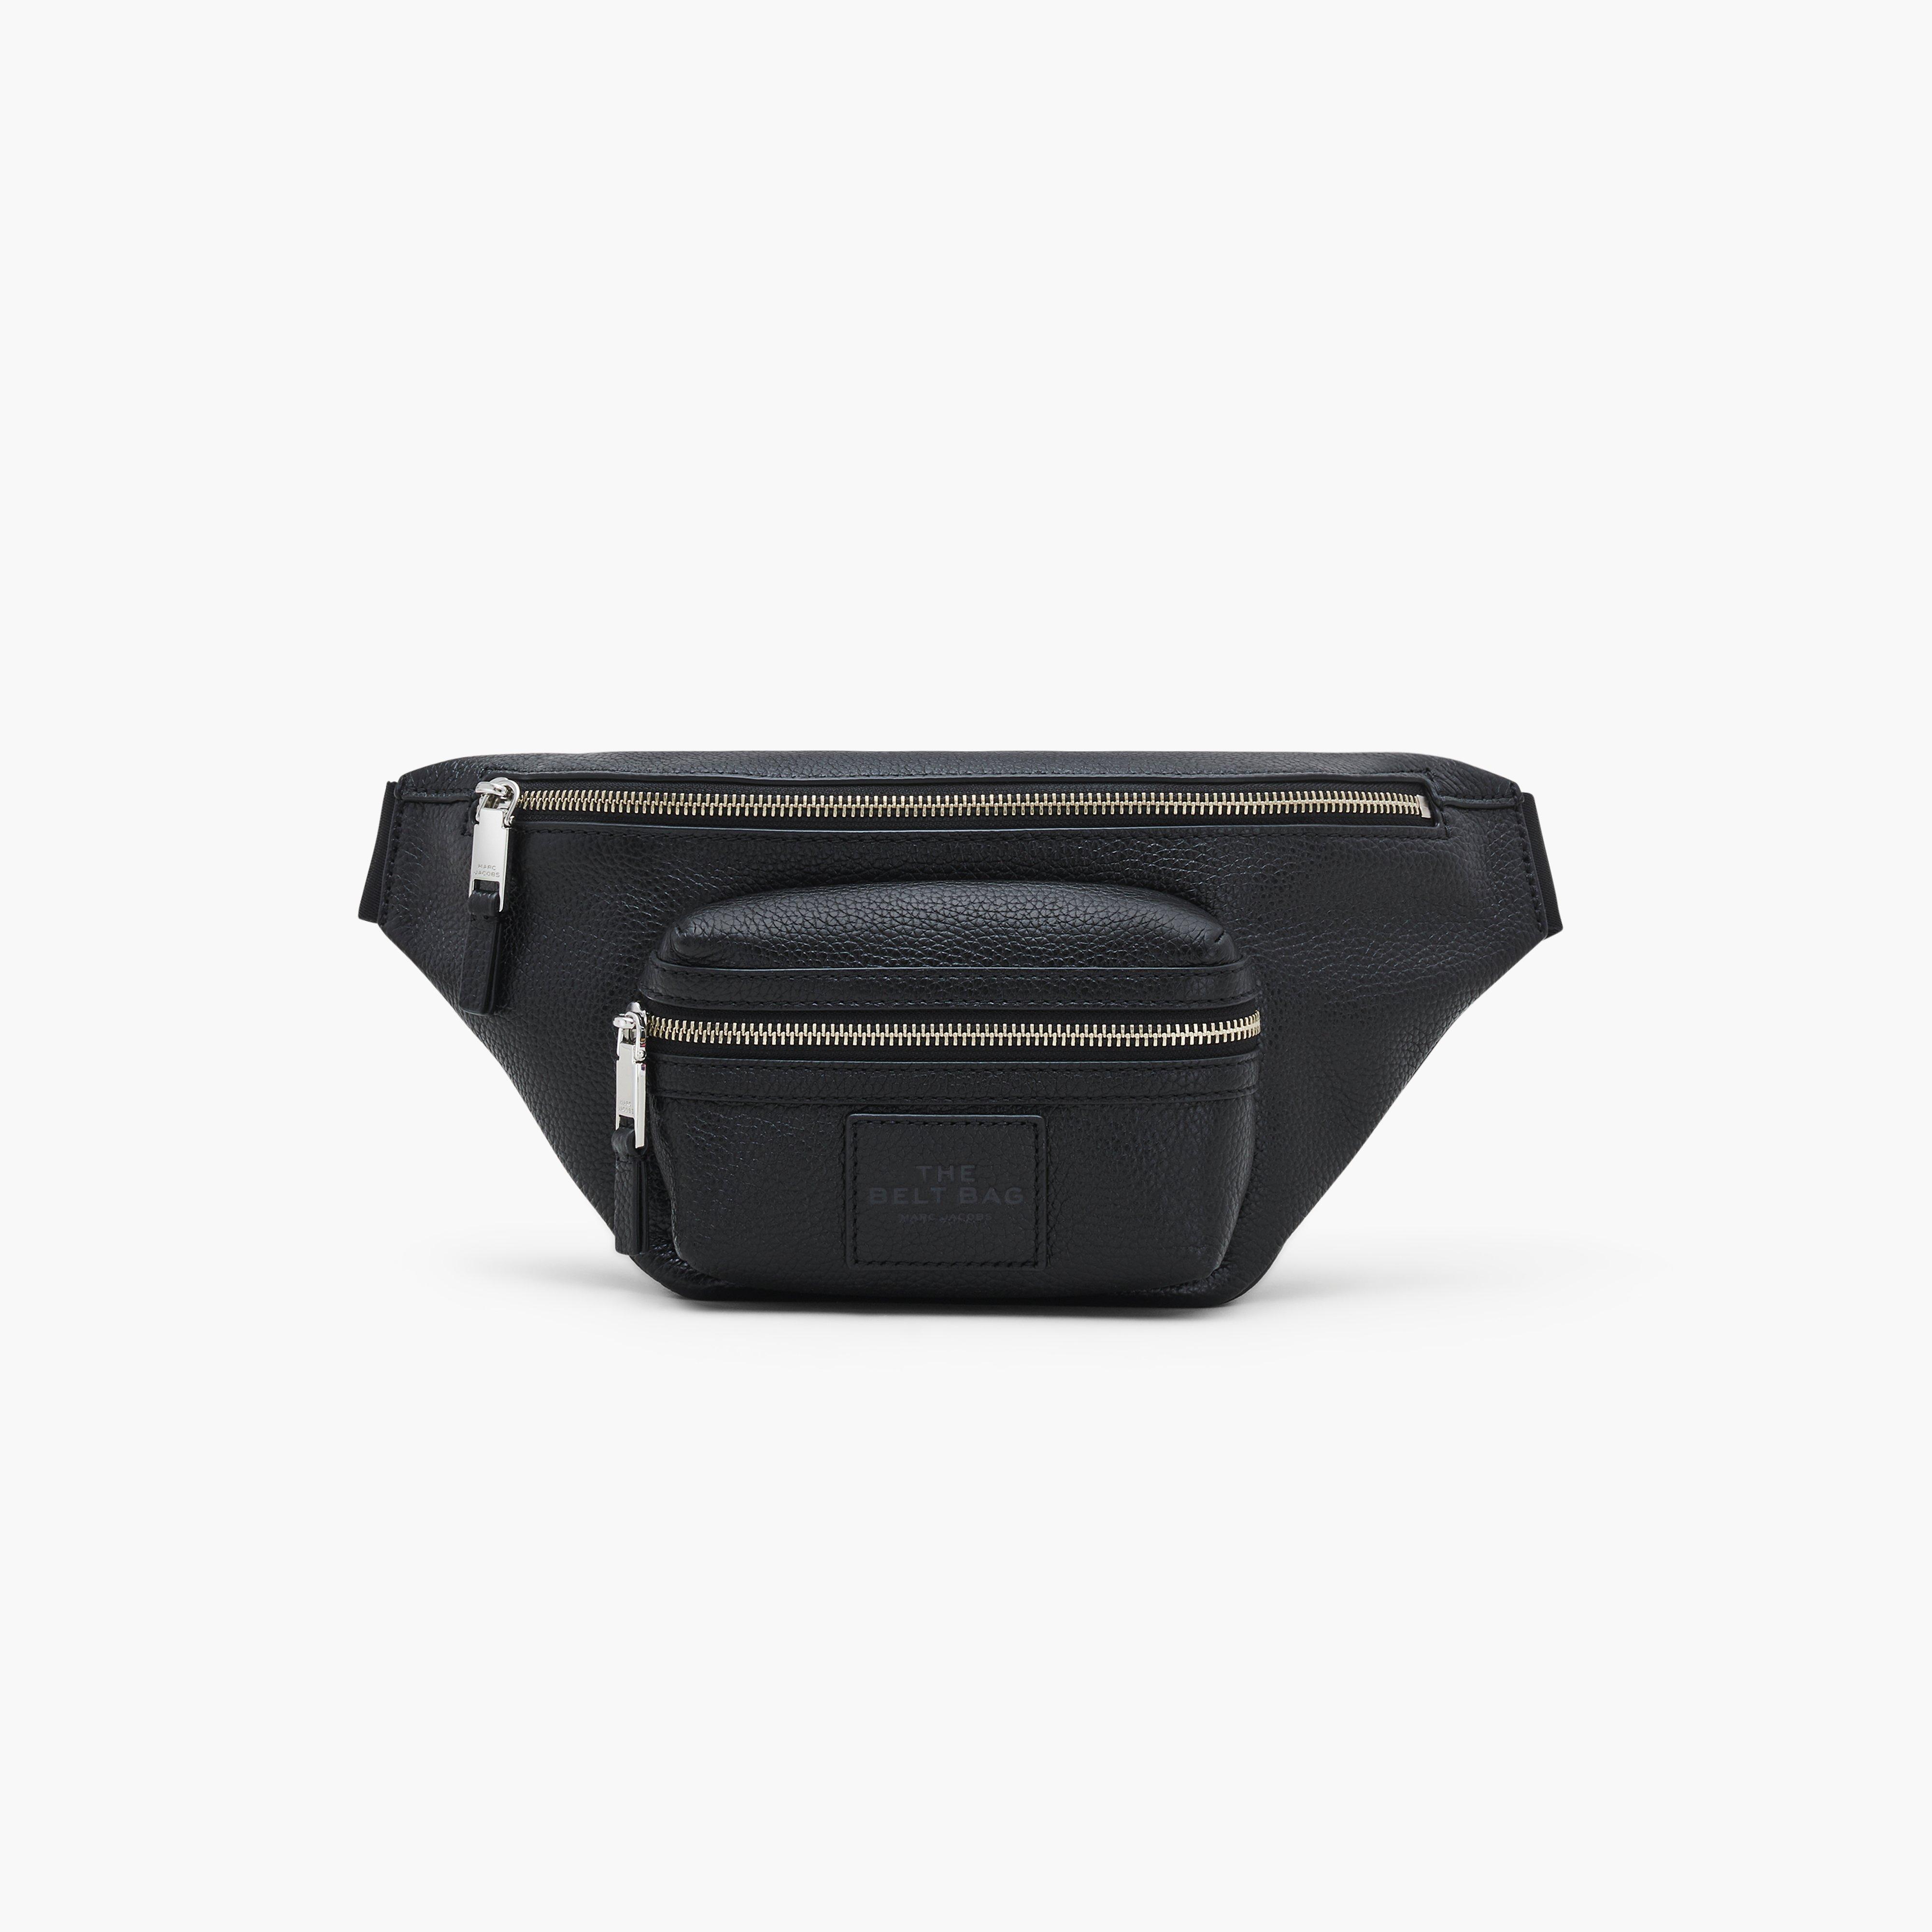 Marc by Marc jacobs The Leather Belt Bag,BLACK